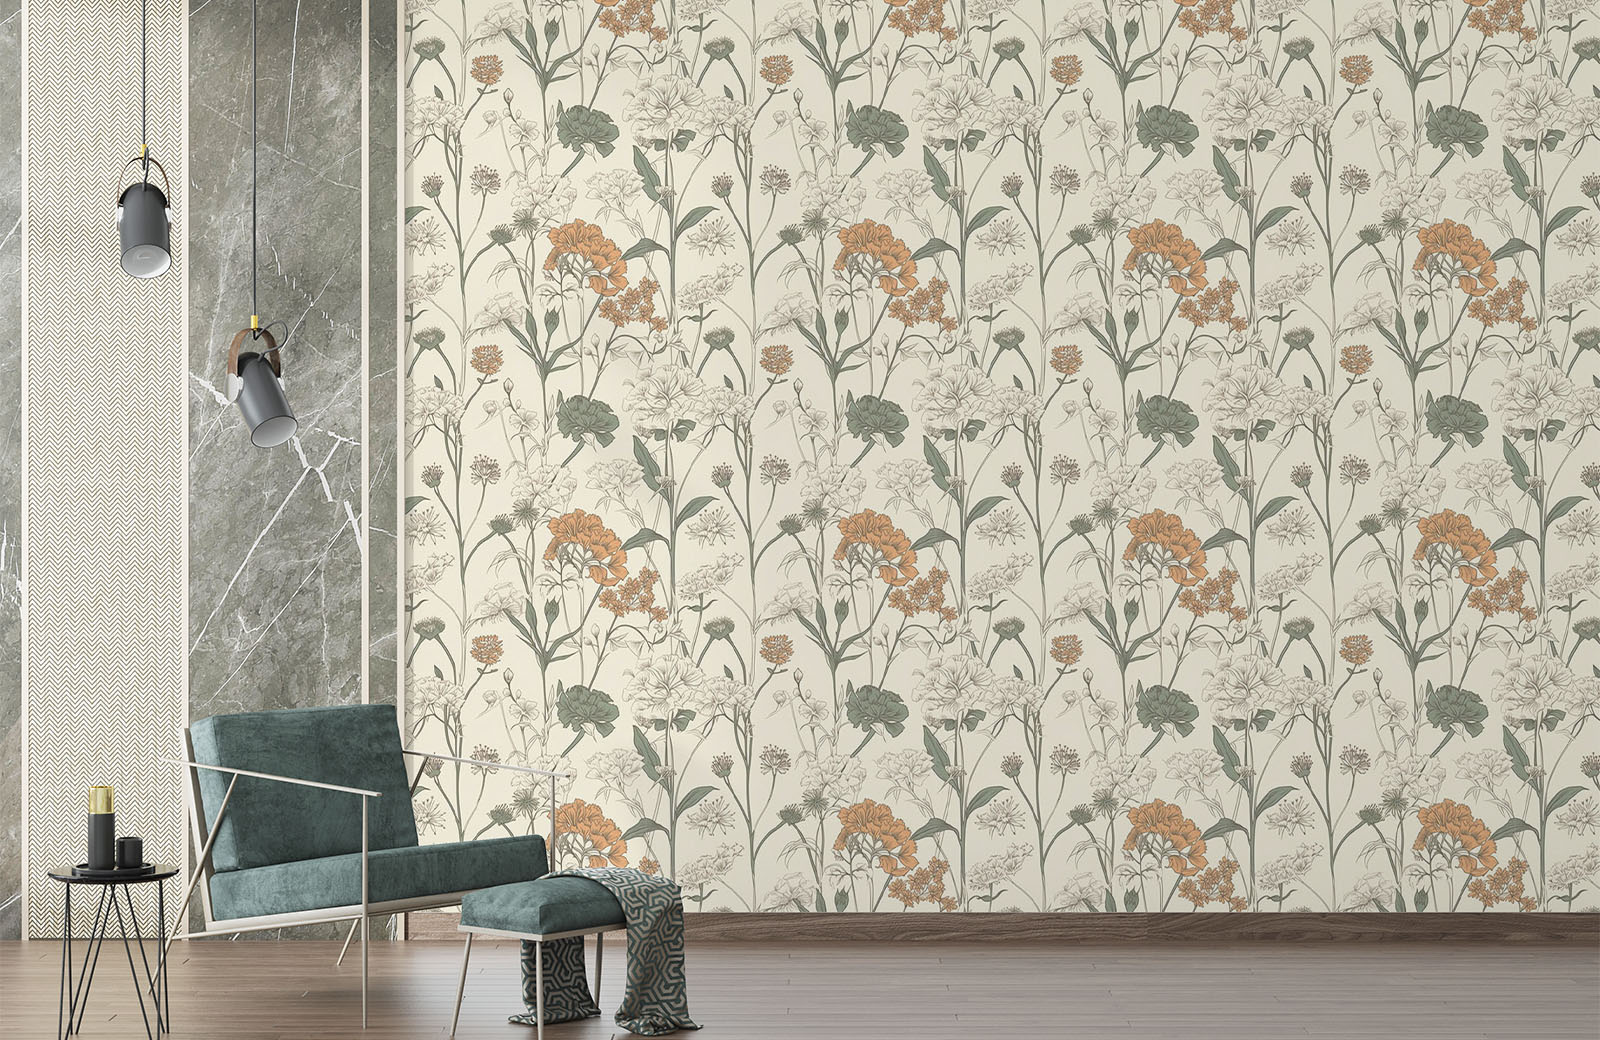 green-orange-flowers-in-cream-background-wallpaper-with-chair